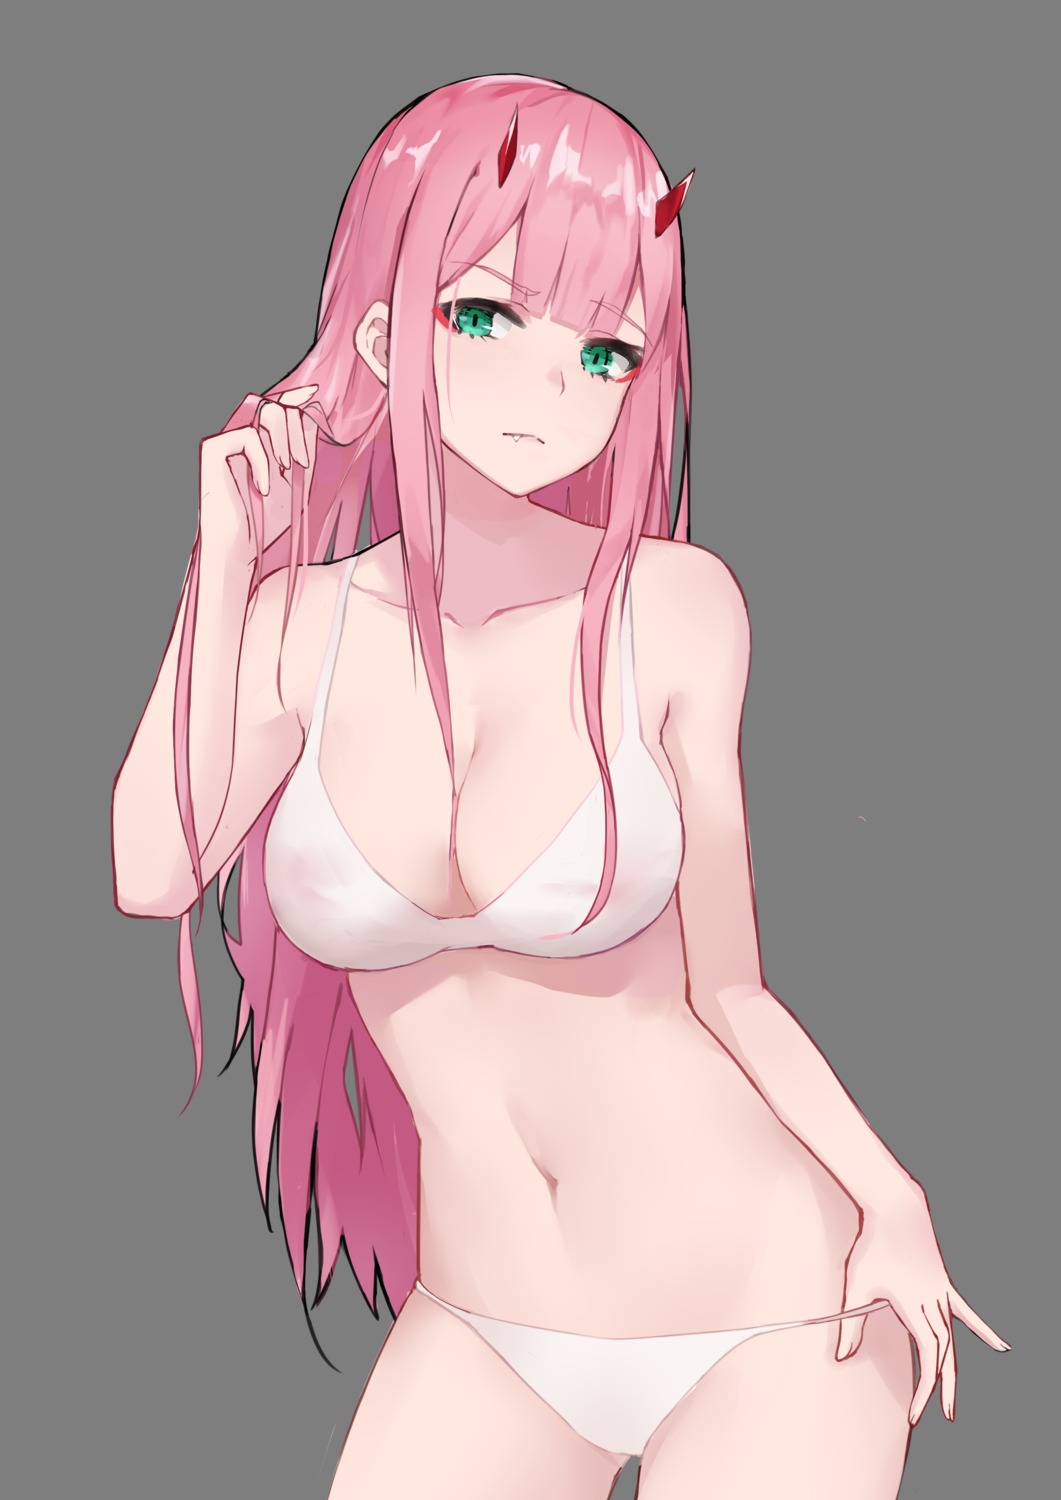 bra cleavage darling_in_the_franxx horns pantsu transparent_png yoruciel zero_two_(darling_in_the_franxx)